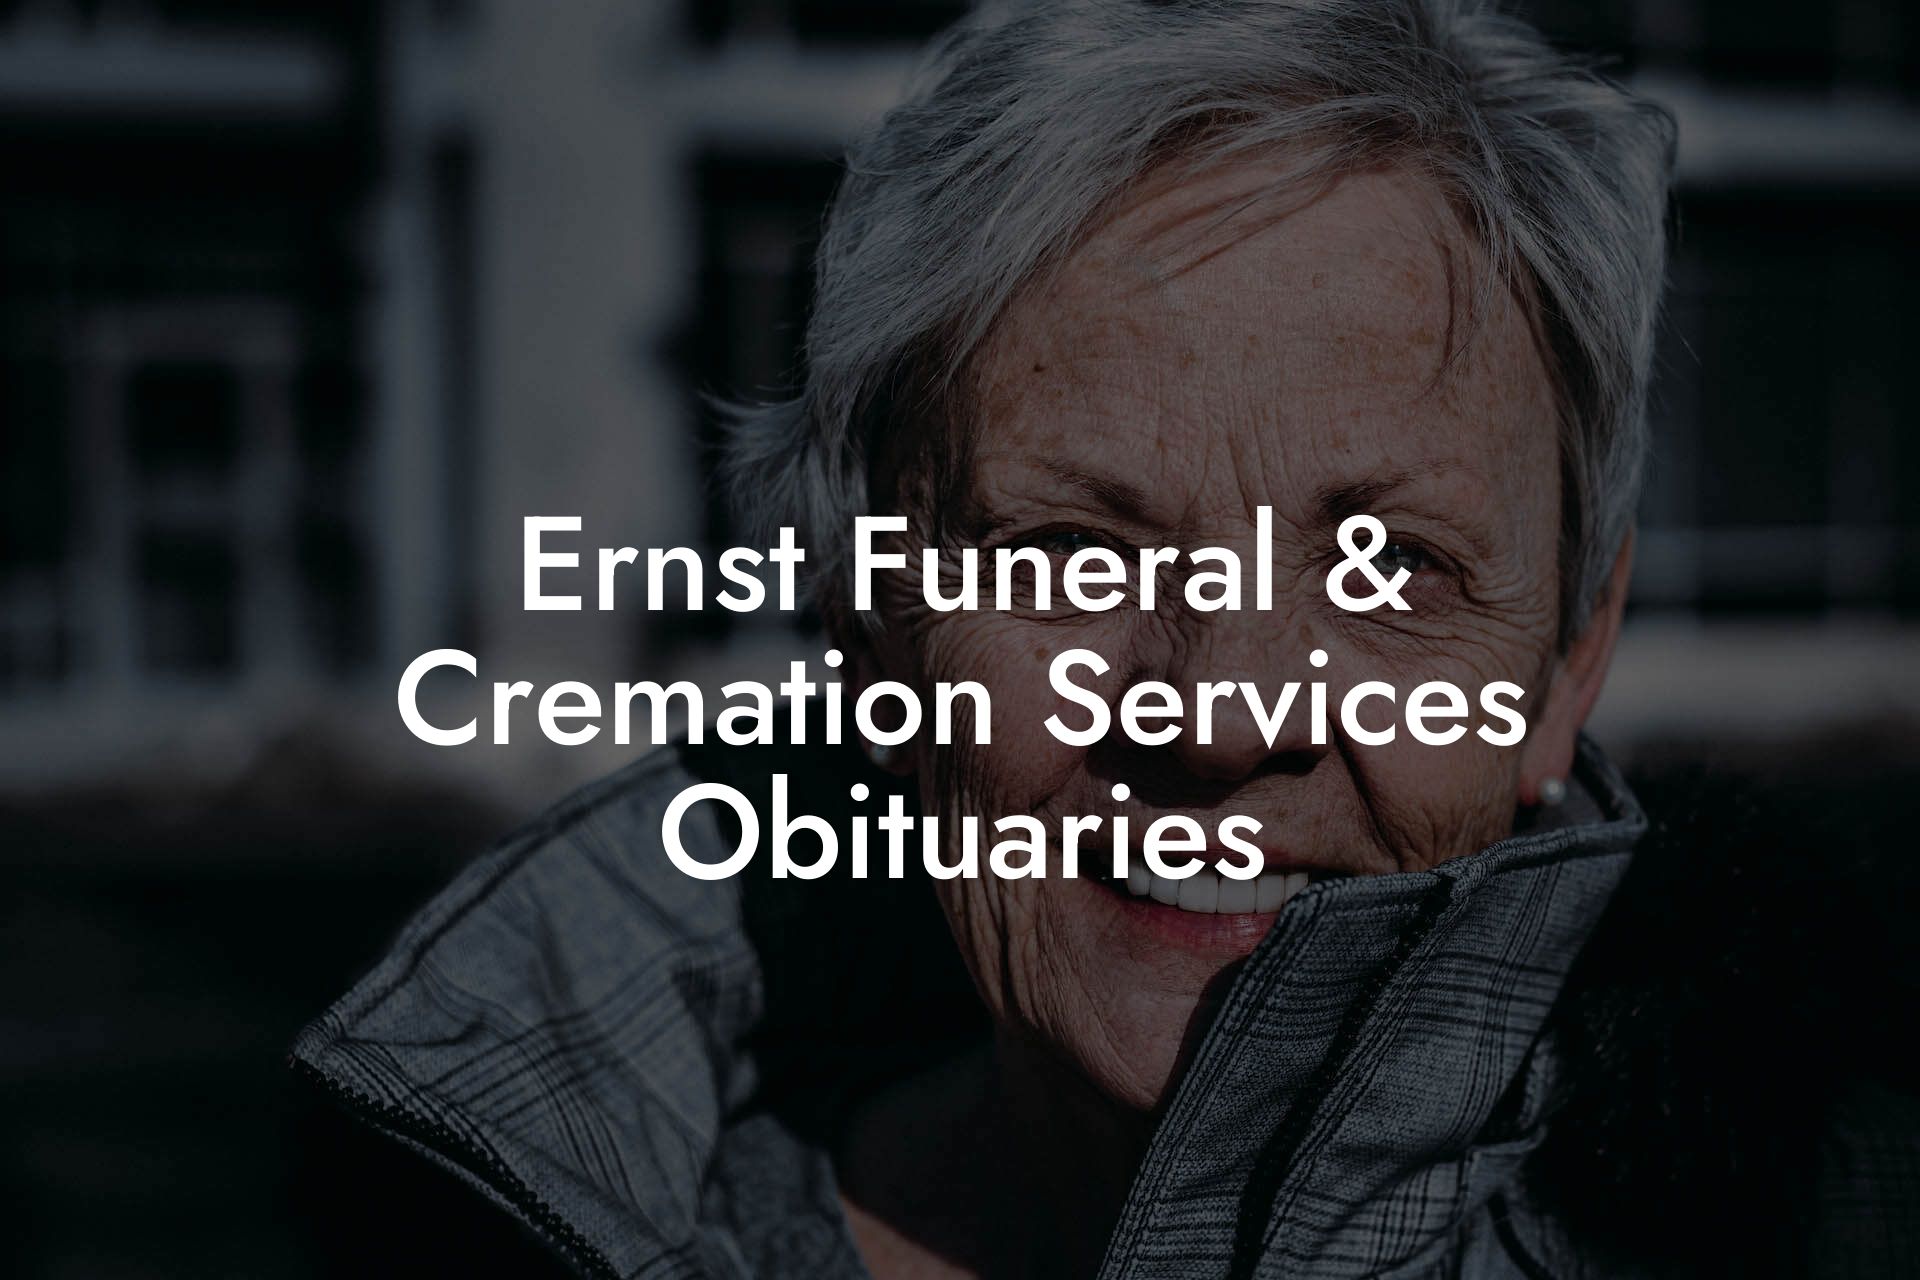 Ernst Funeral & Cremation Services Obituaries